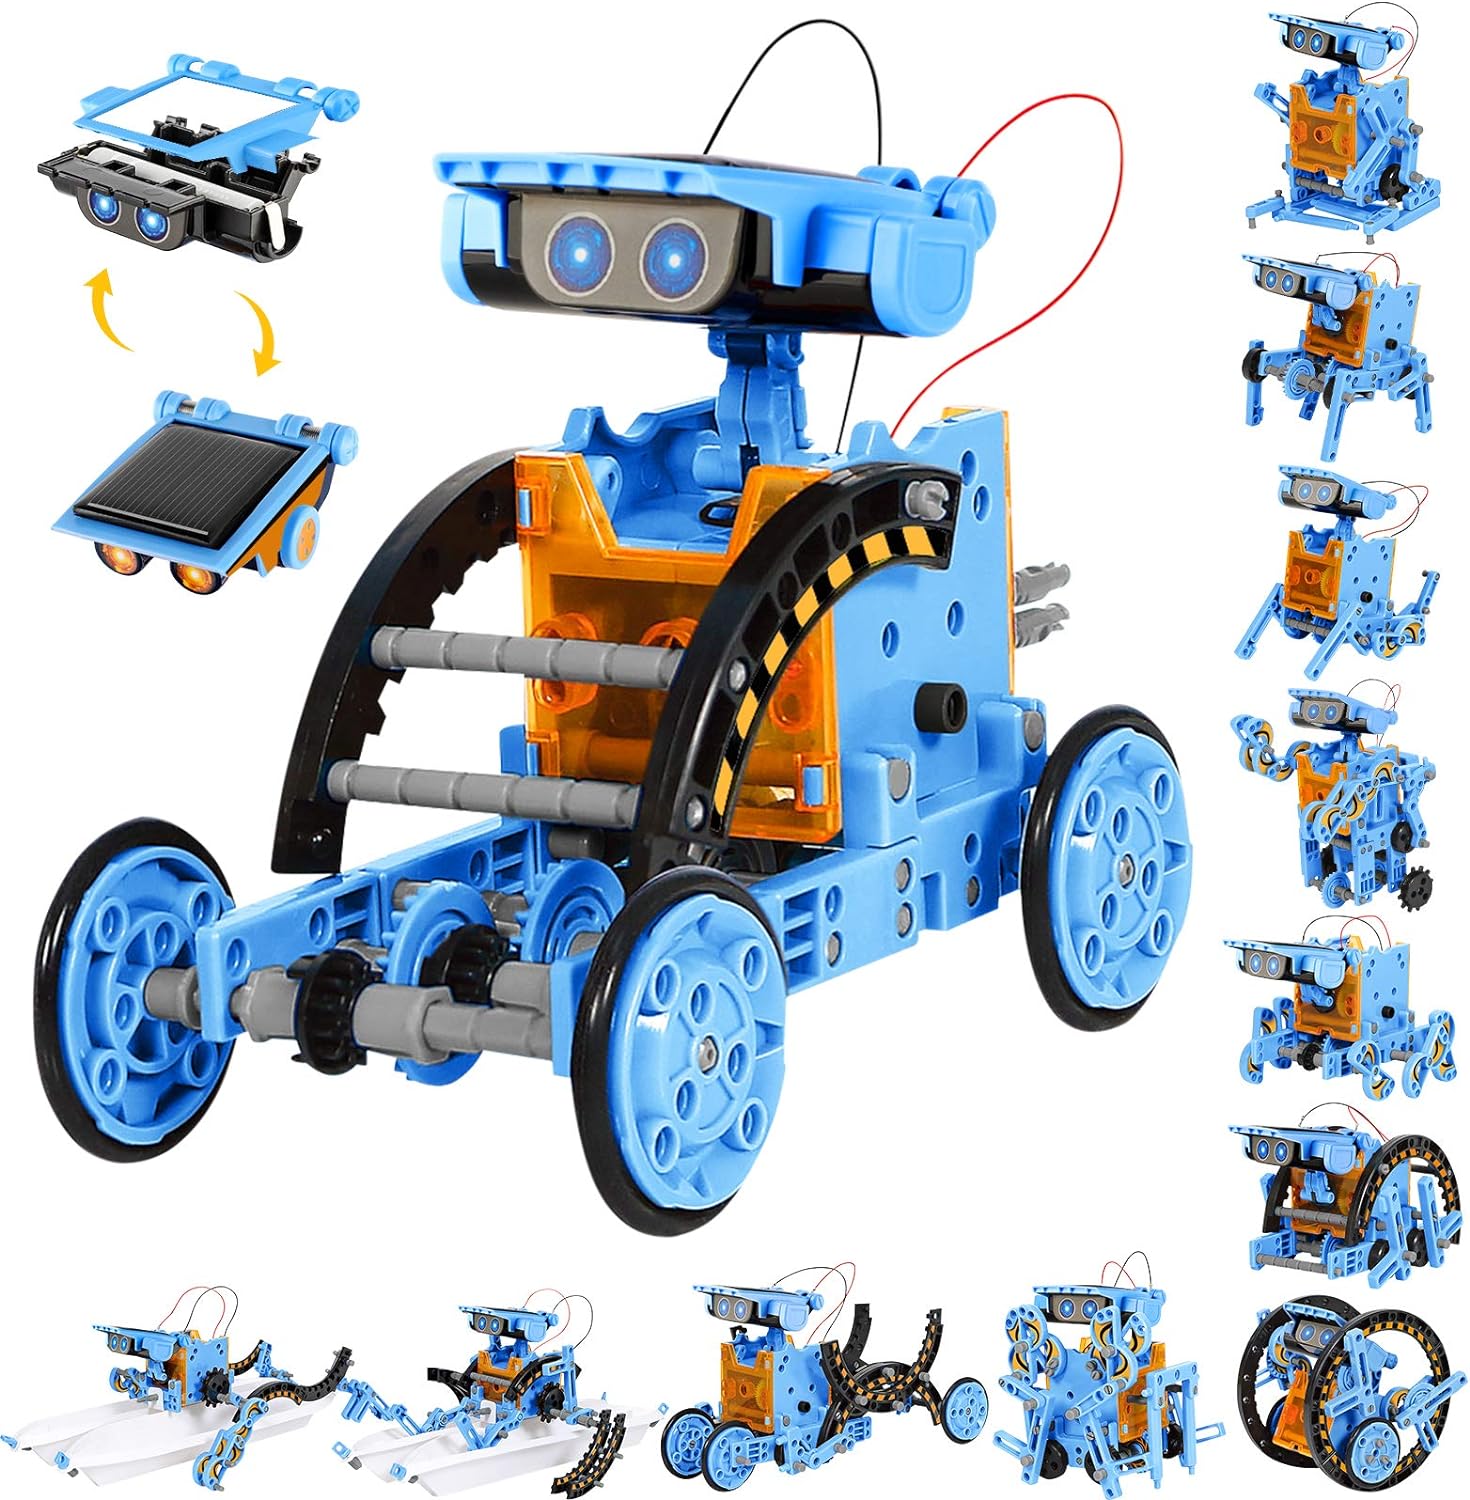 Sillbird STEM Projects 12 in 1 Solar Robot Toys for Kids, 190 Pieces Solar and Cell Powered Dual Drive Motor DIY Building Science Learning Educational Experiment Kit, Gift for Boys Girls Aged 8-12